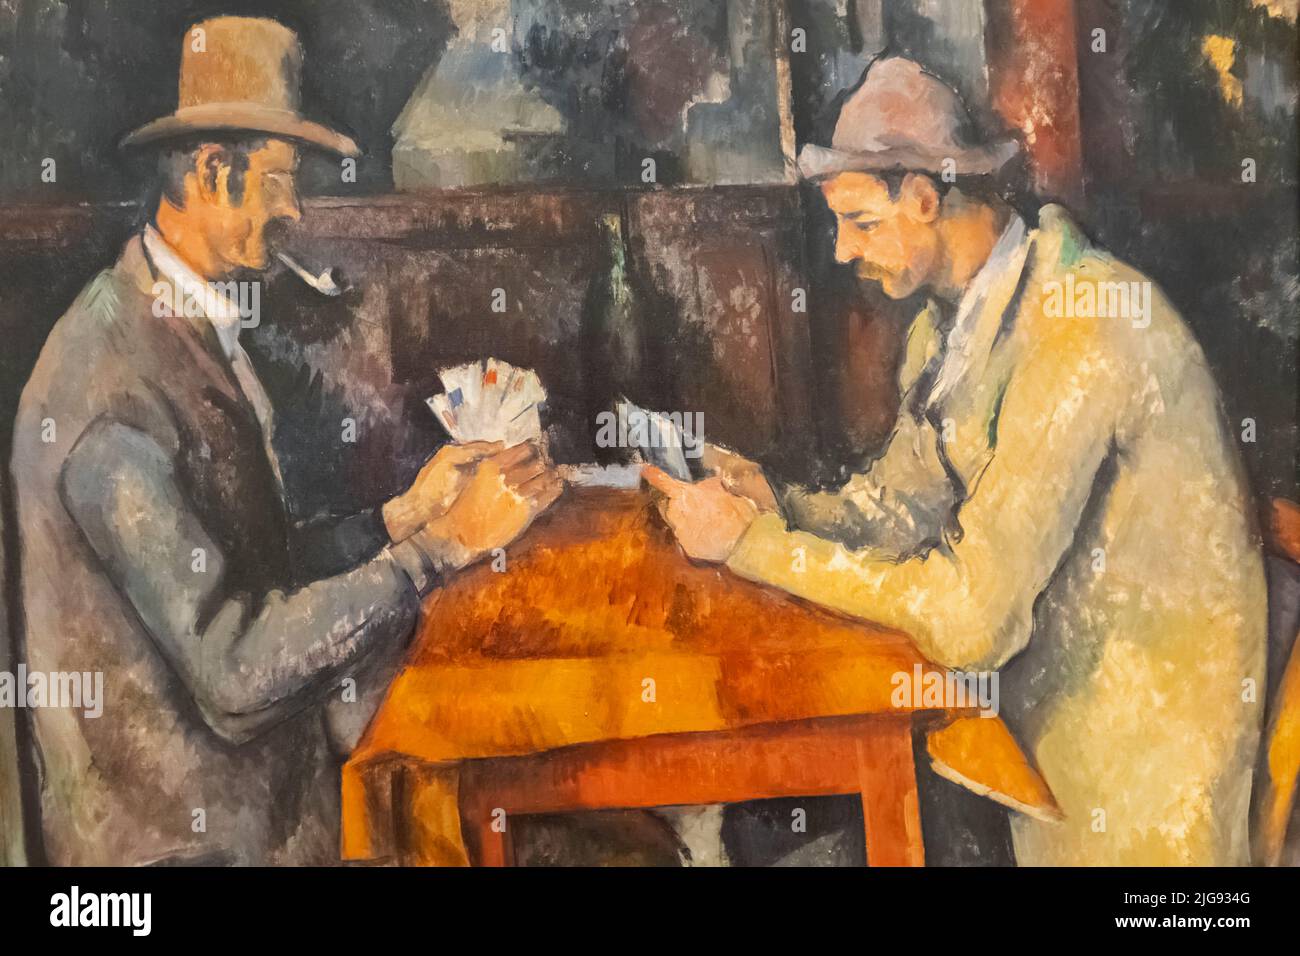 England, London, Somerset House, The Courtauld Gallery, Painting titled 'The Card Players' by Paul Cezanne dated 1892 Stock Photo